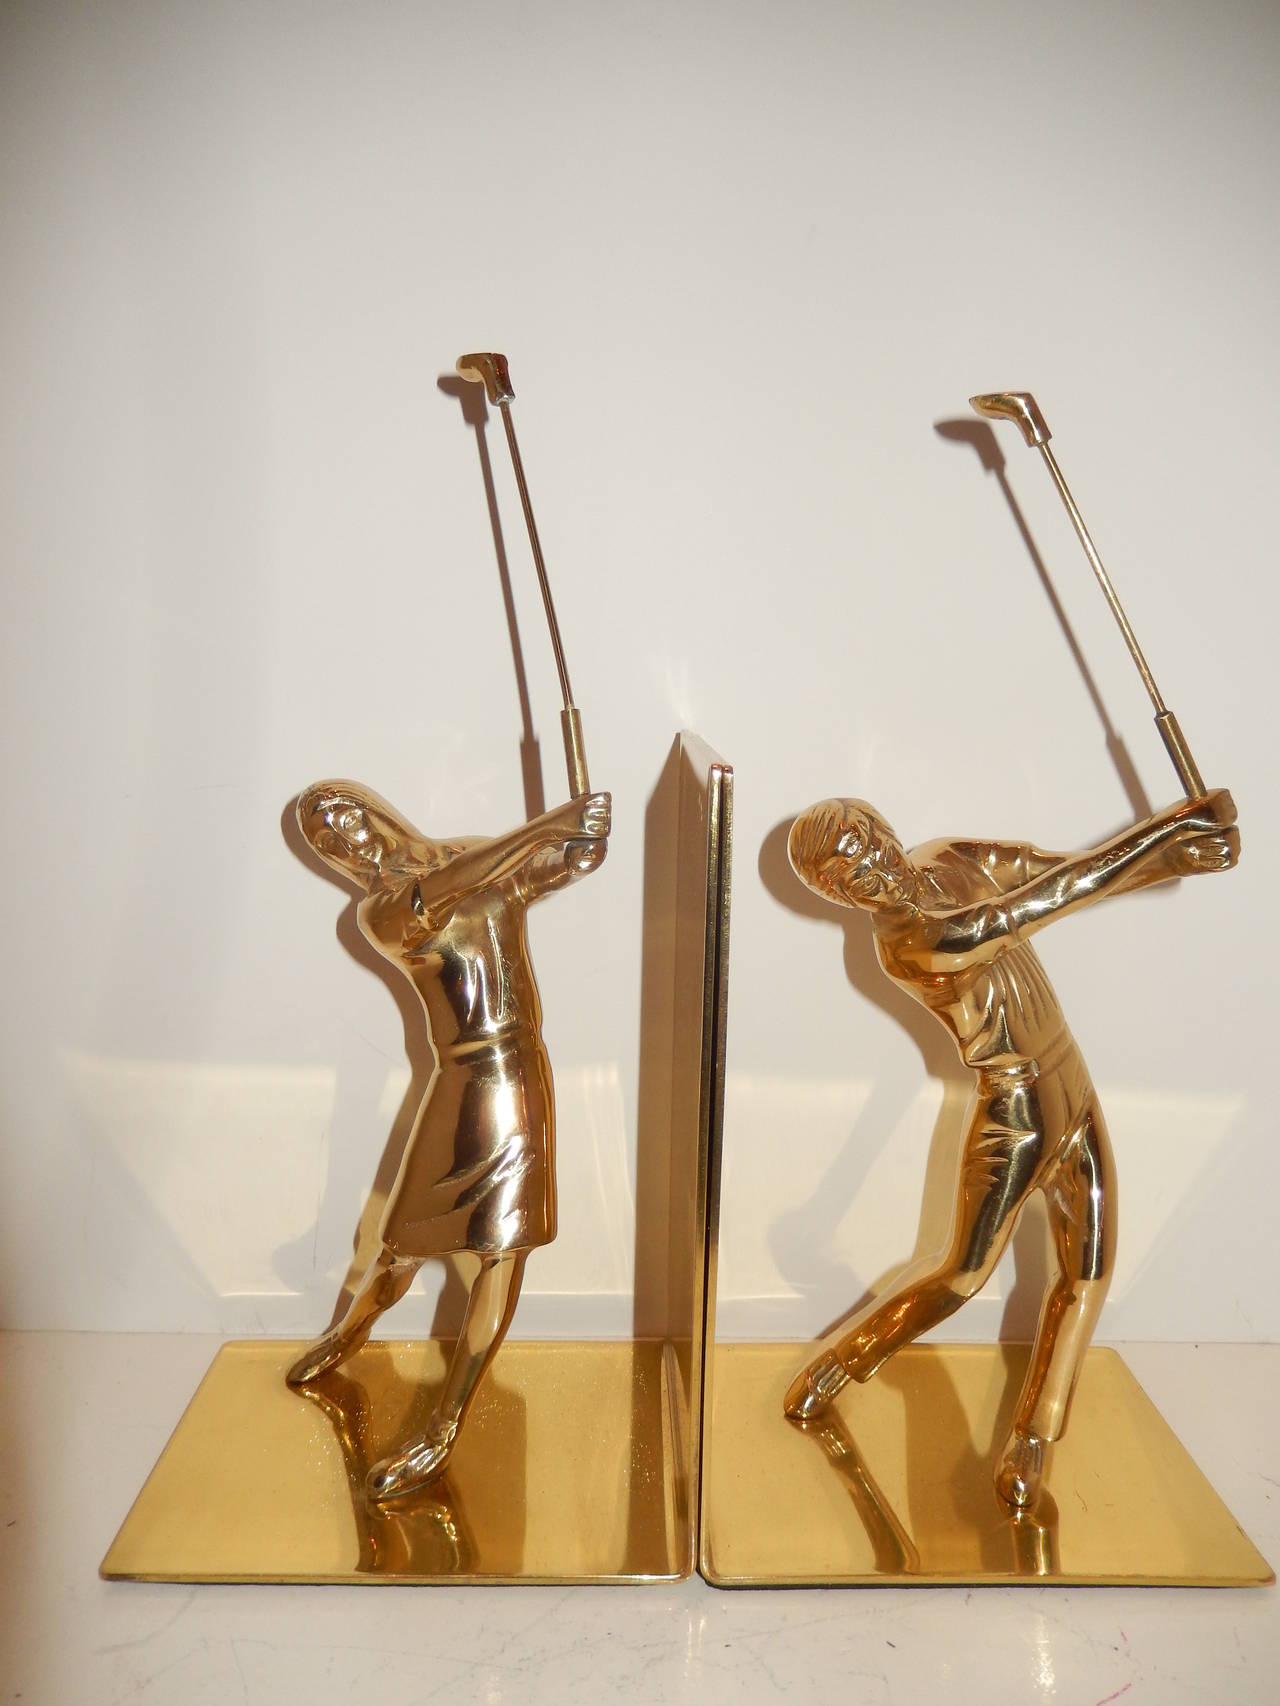 Pair of solid brass well detailed bookends. Sporting golf attire from the 1920s, wonderful condition with good weight (for book support).